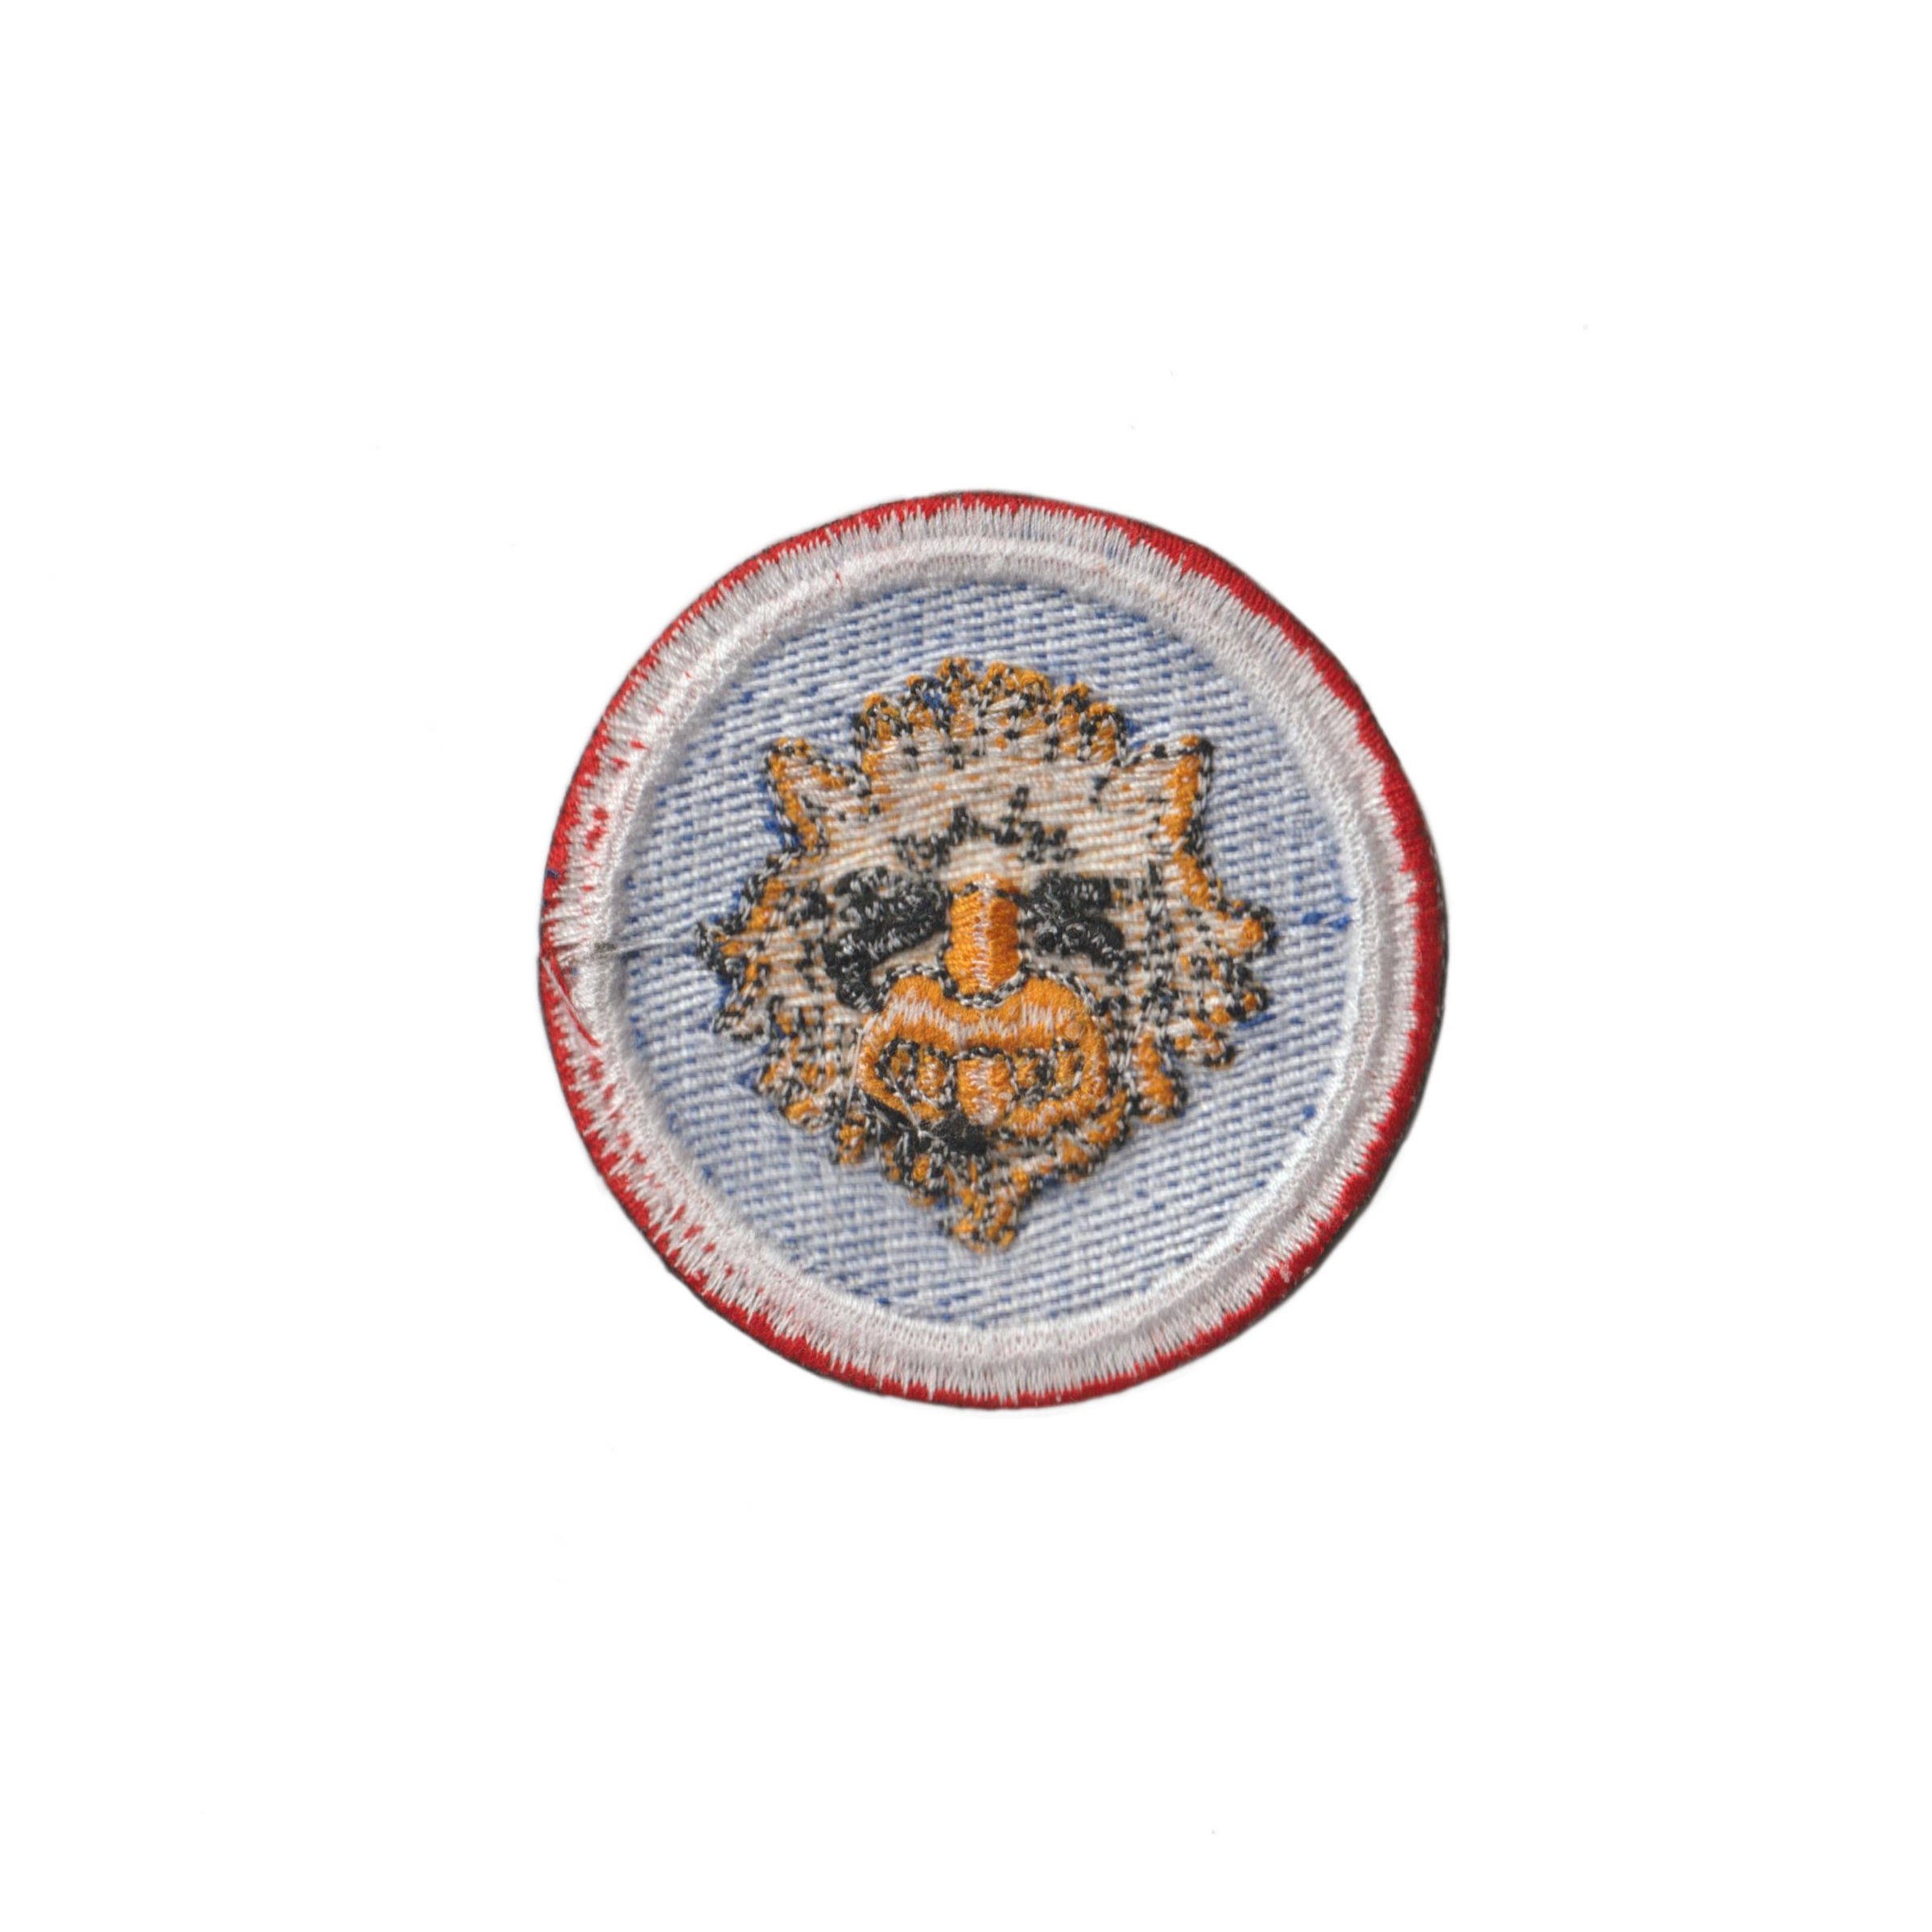 Patch of 106th Infantry Division - repro 4,75 € | Nestof.pl